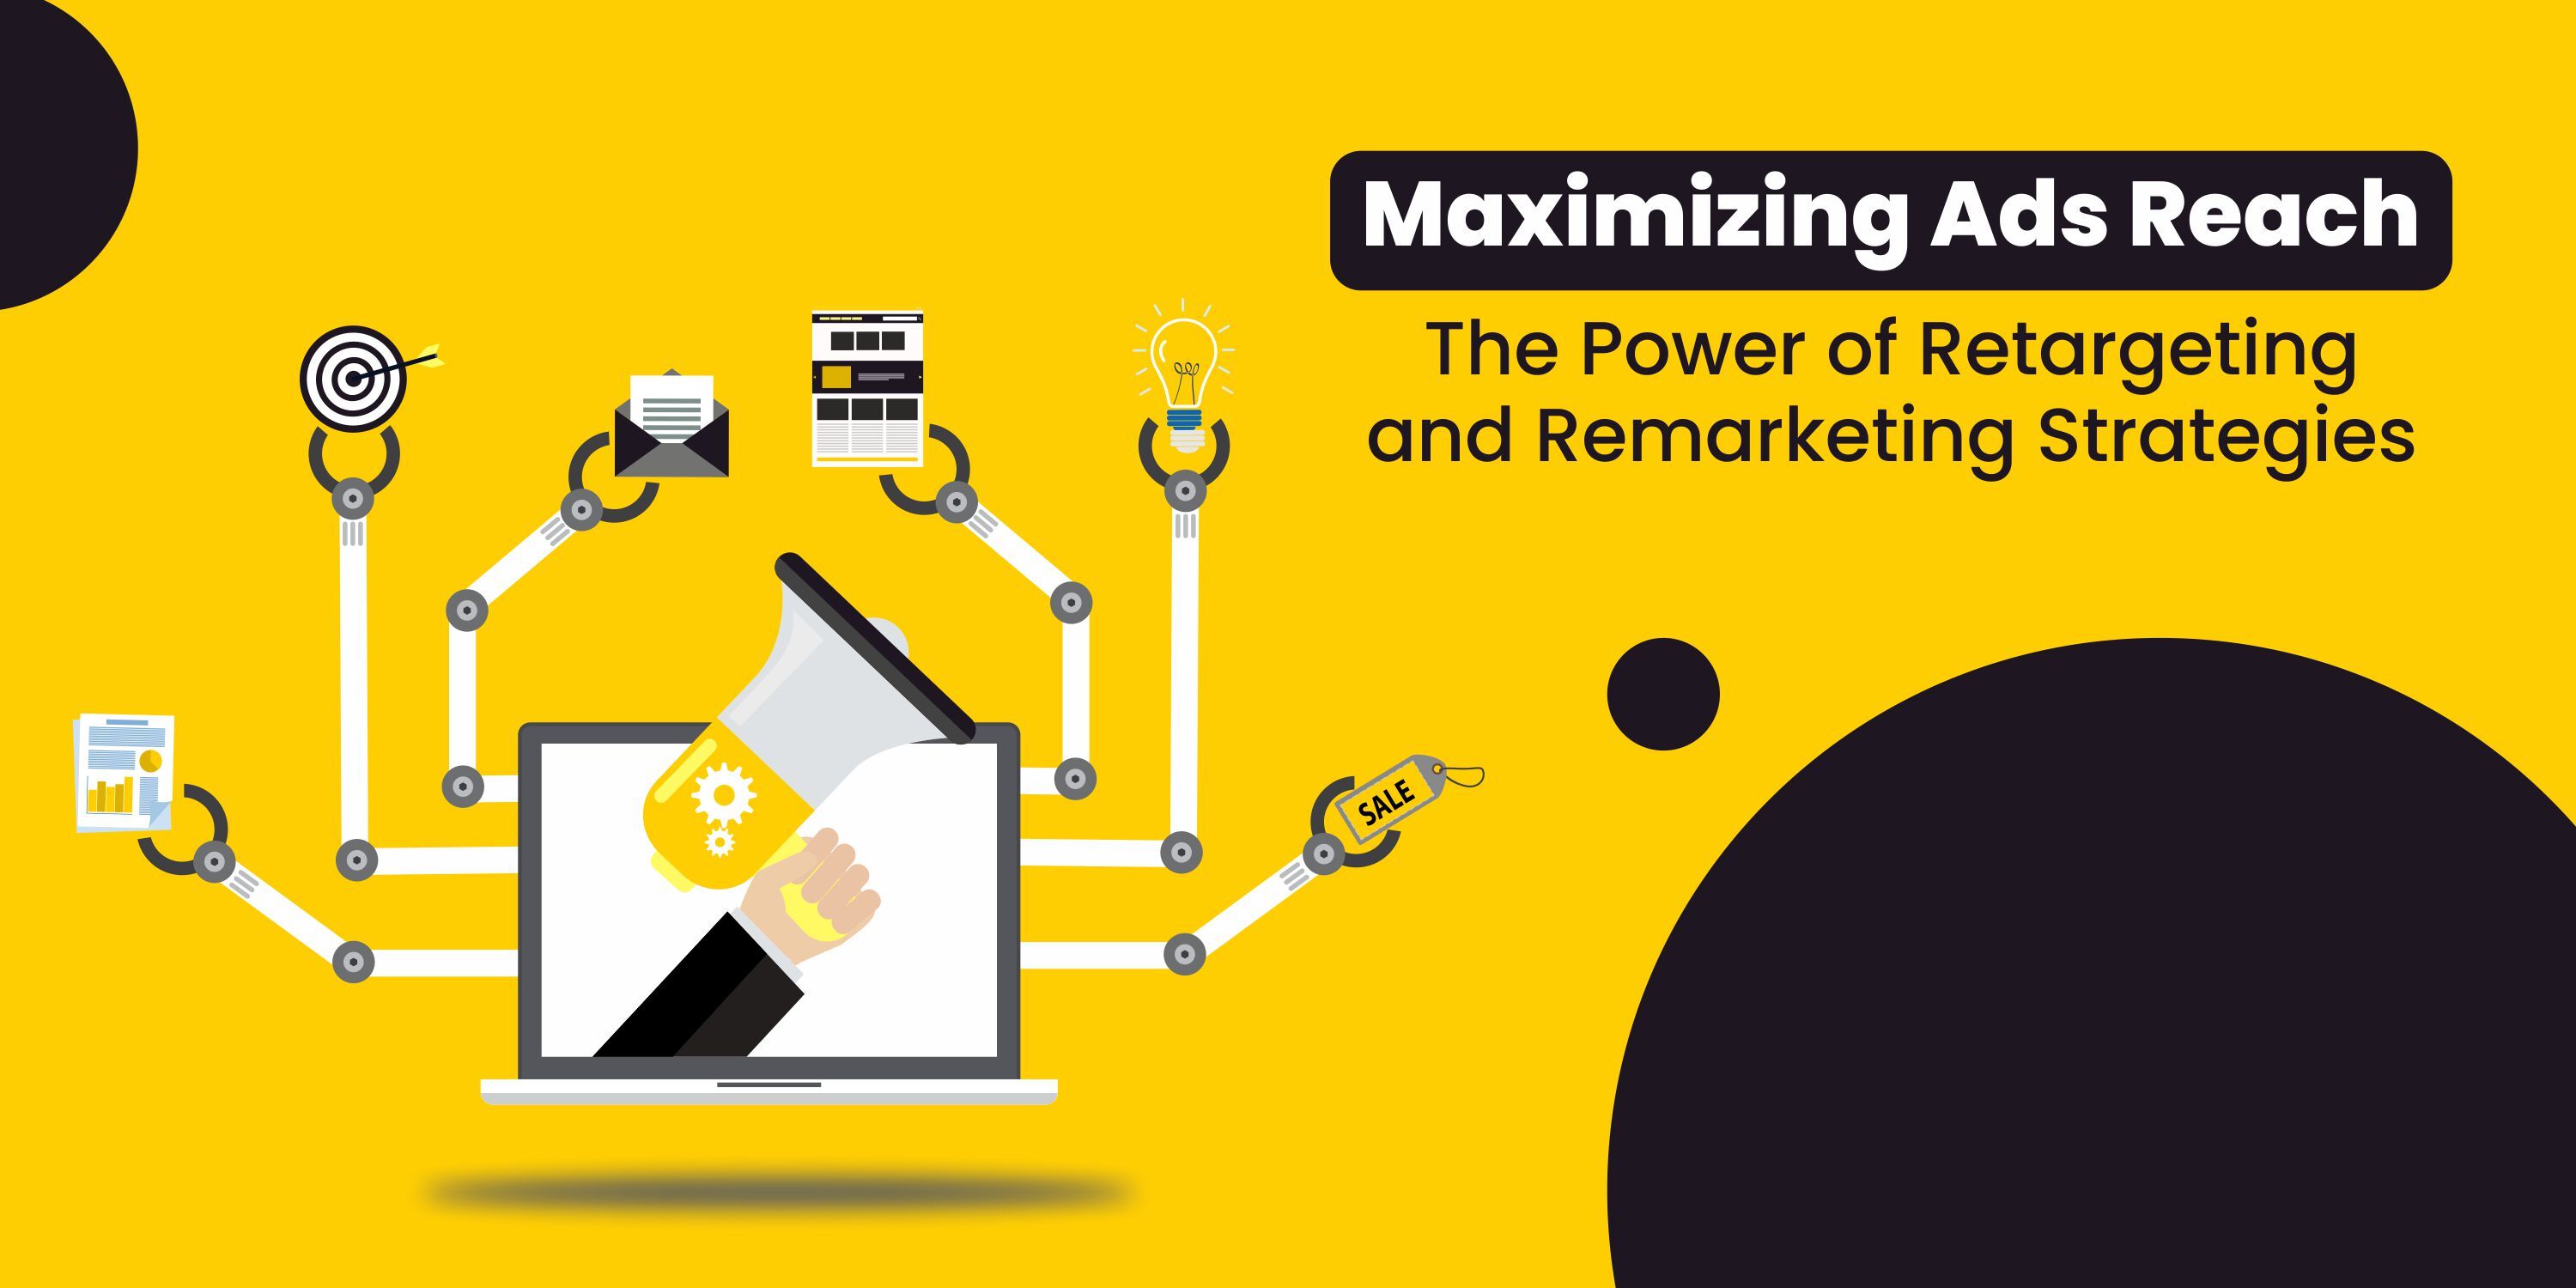 Maximizing Ads Reach: The Power of Retargeting and Remarketing Strategies